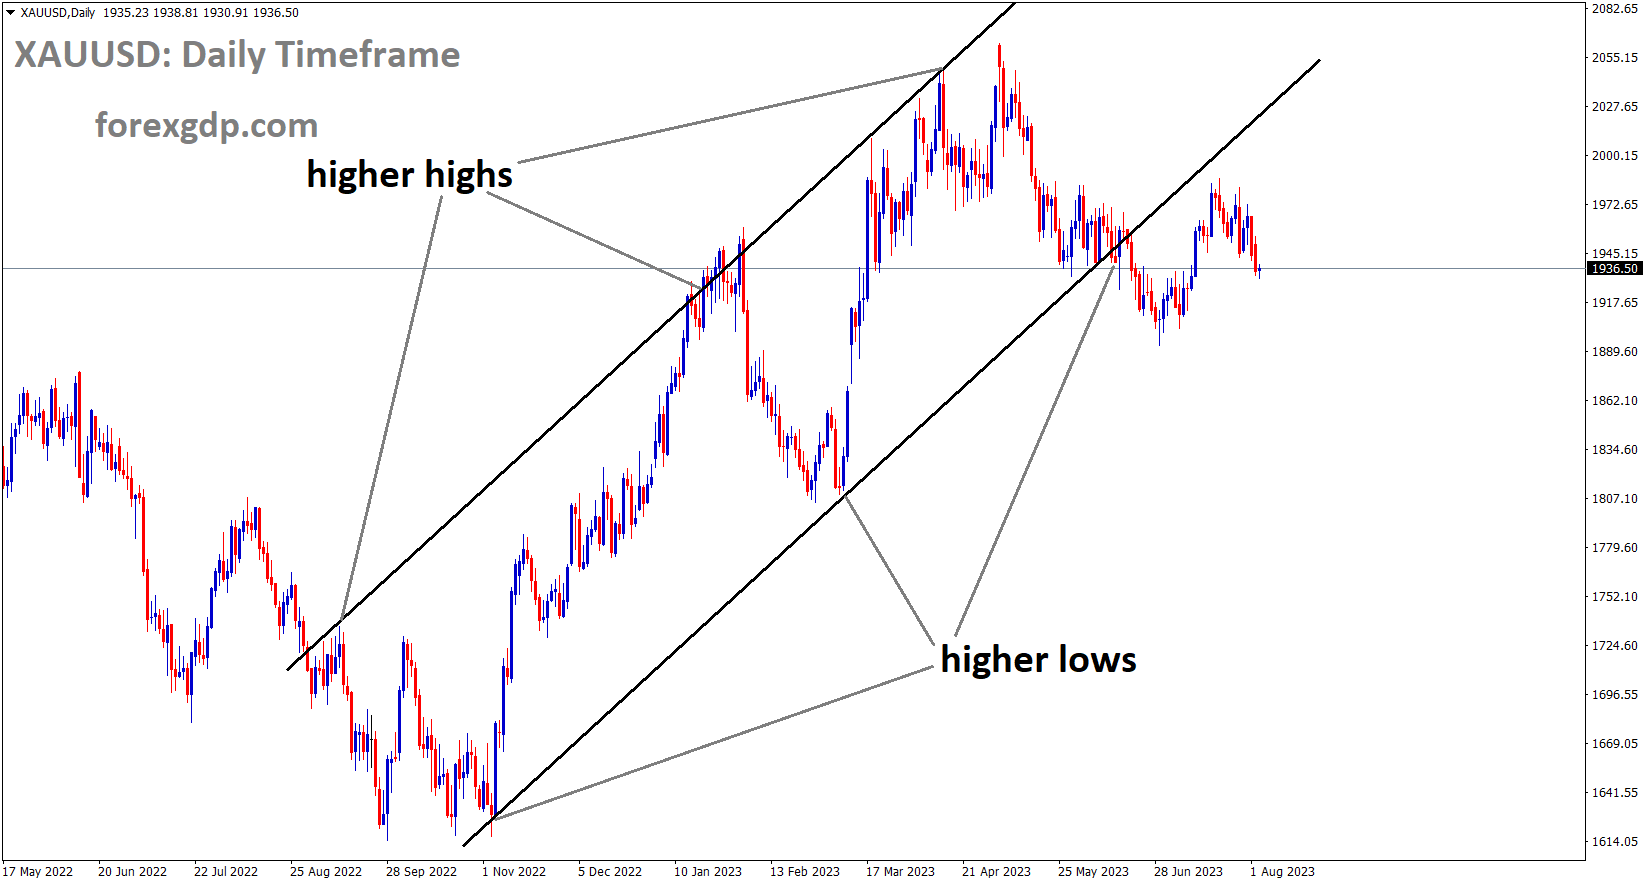 XAUUSD Gold Price is moving in an Ascending channel and the market has reached the higher low area of the channel